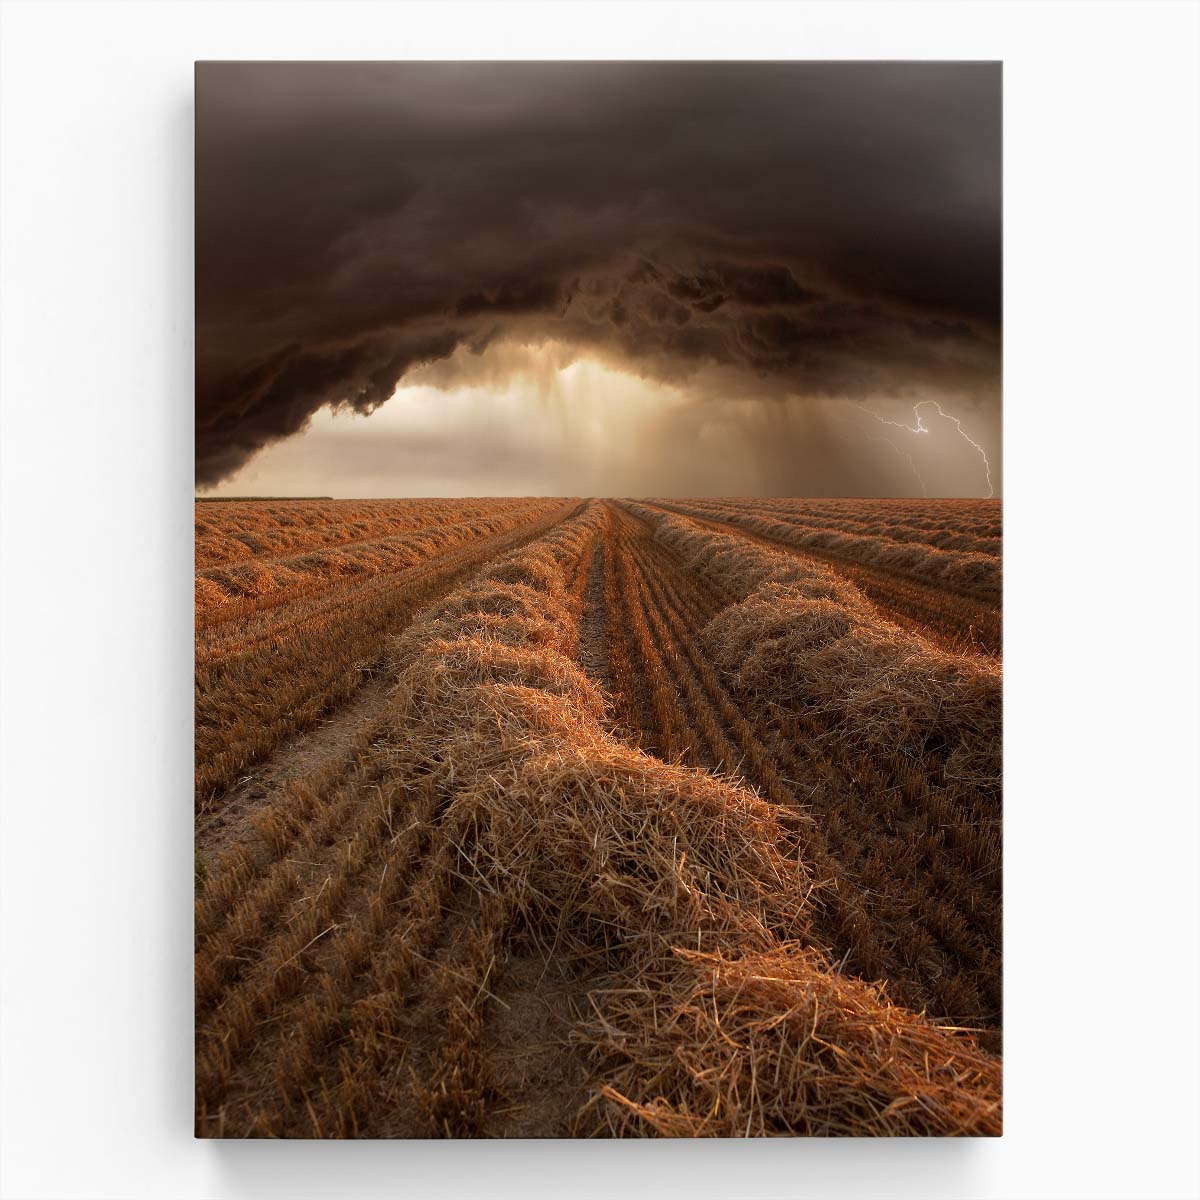 Rural Fields Thunderstorm Photography by Nicolas Schumacher by Luxuriance Designs, made in USA